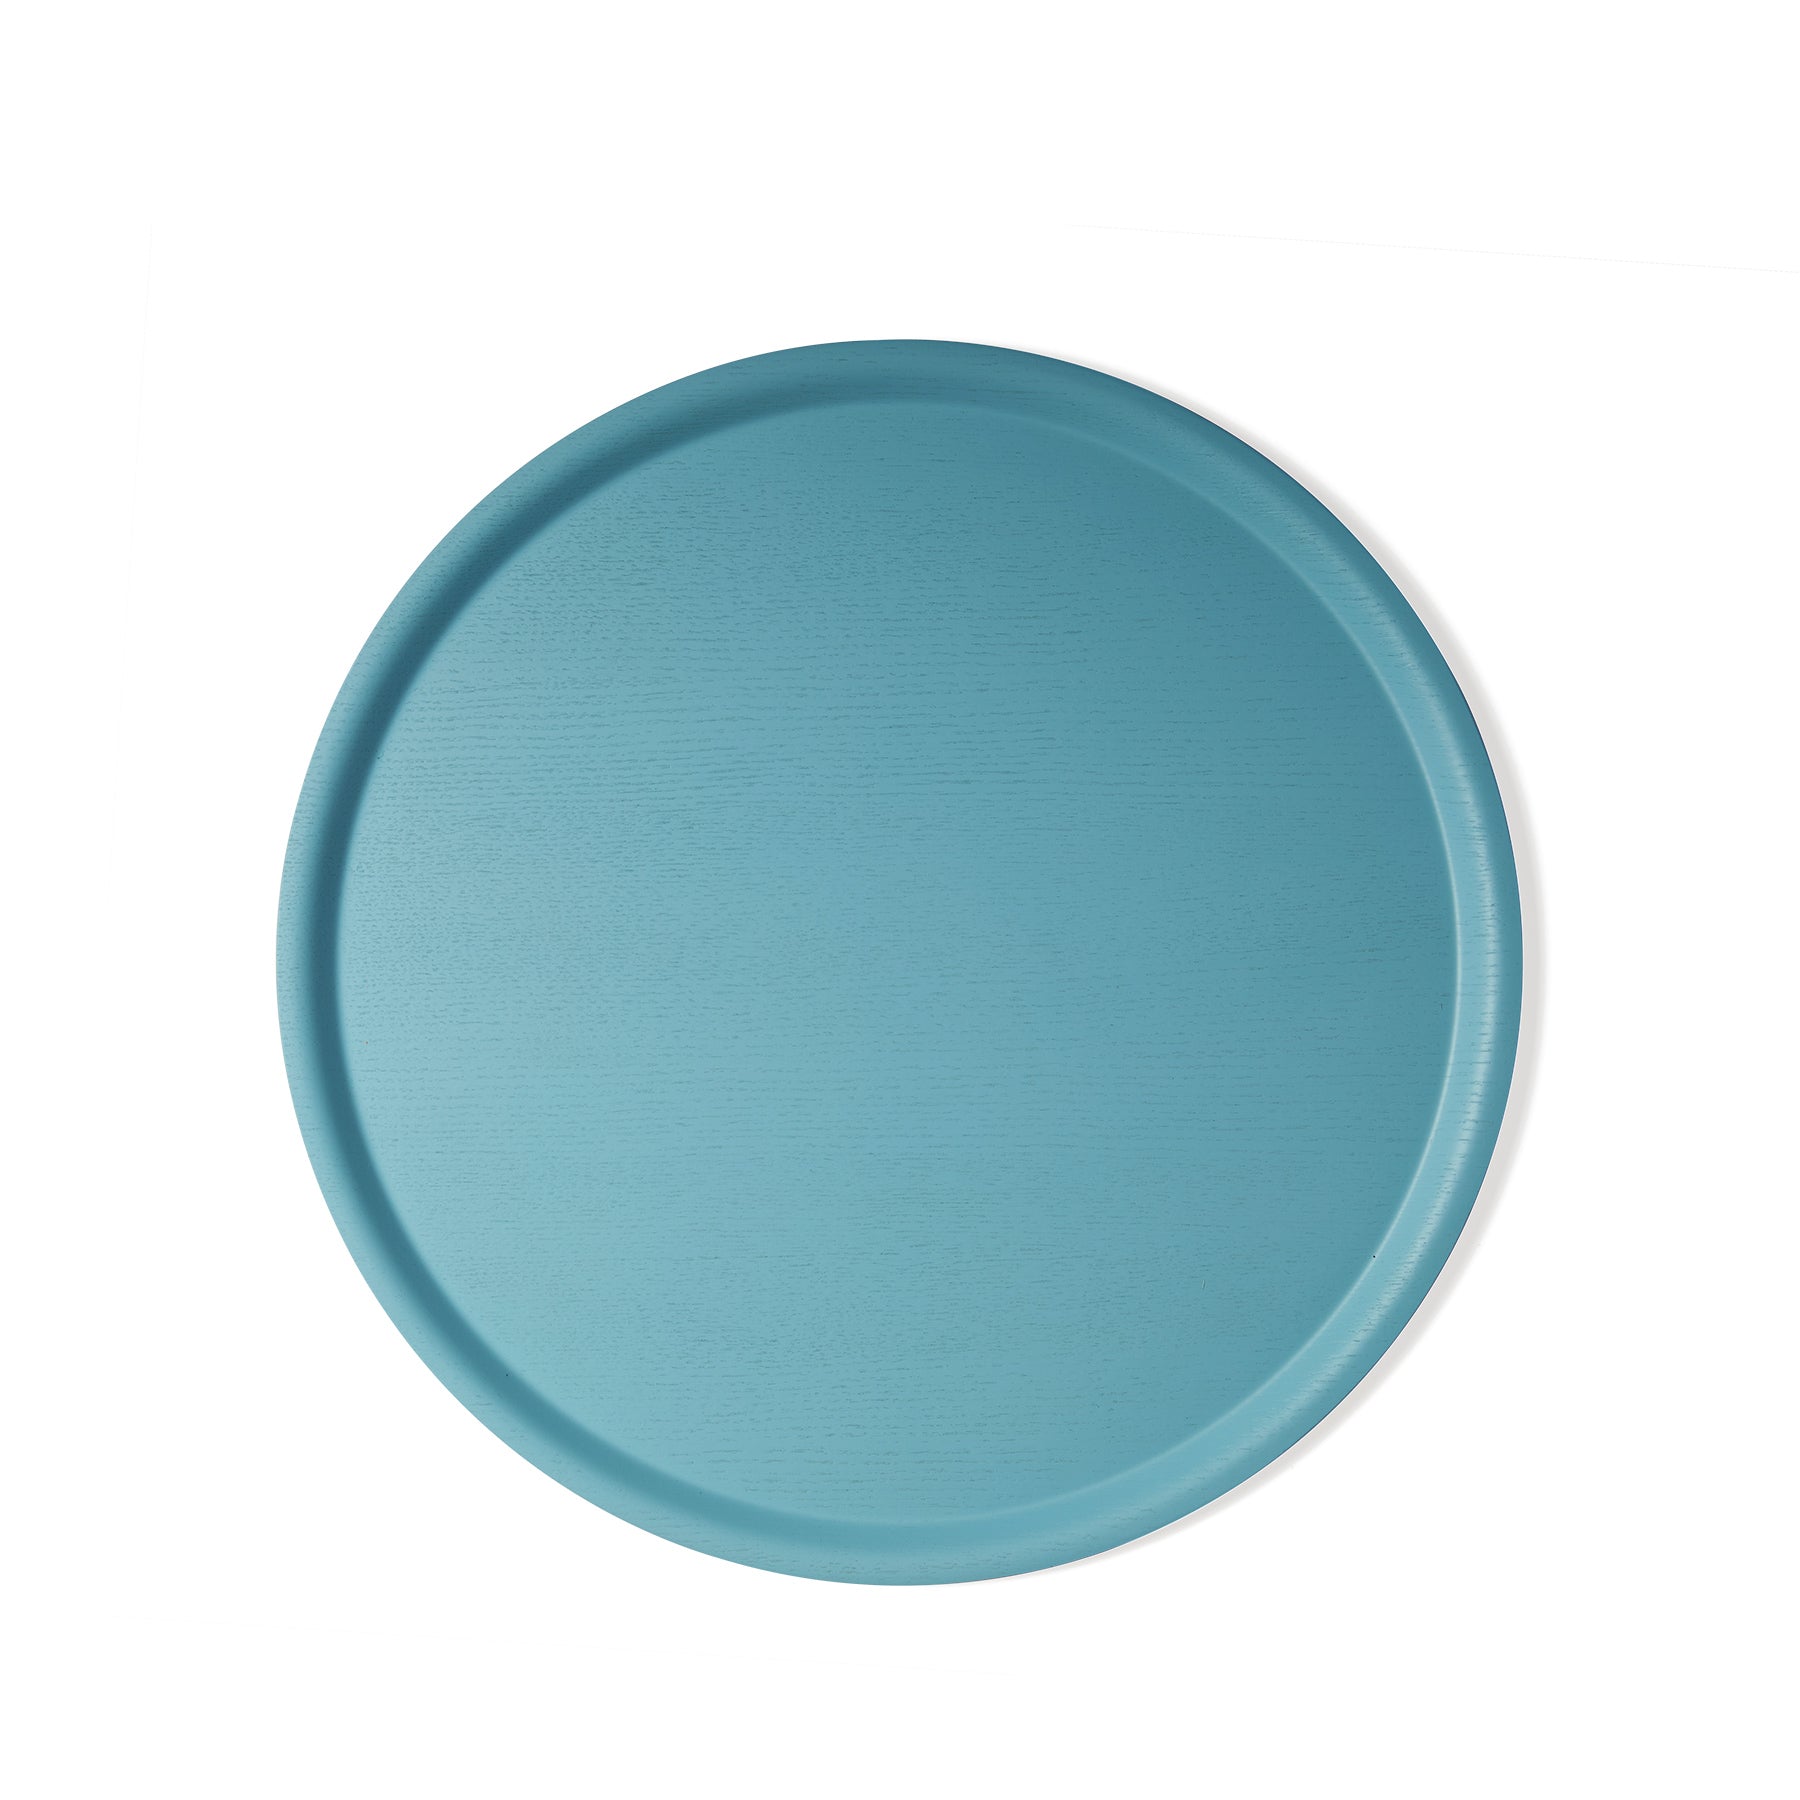 Large Round Tray in Foggy Blue Zoom Image 1